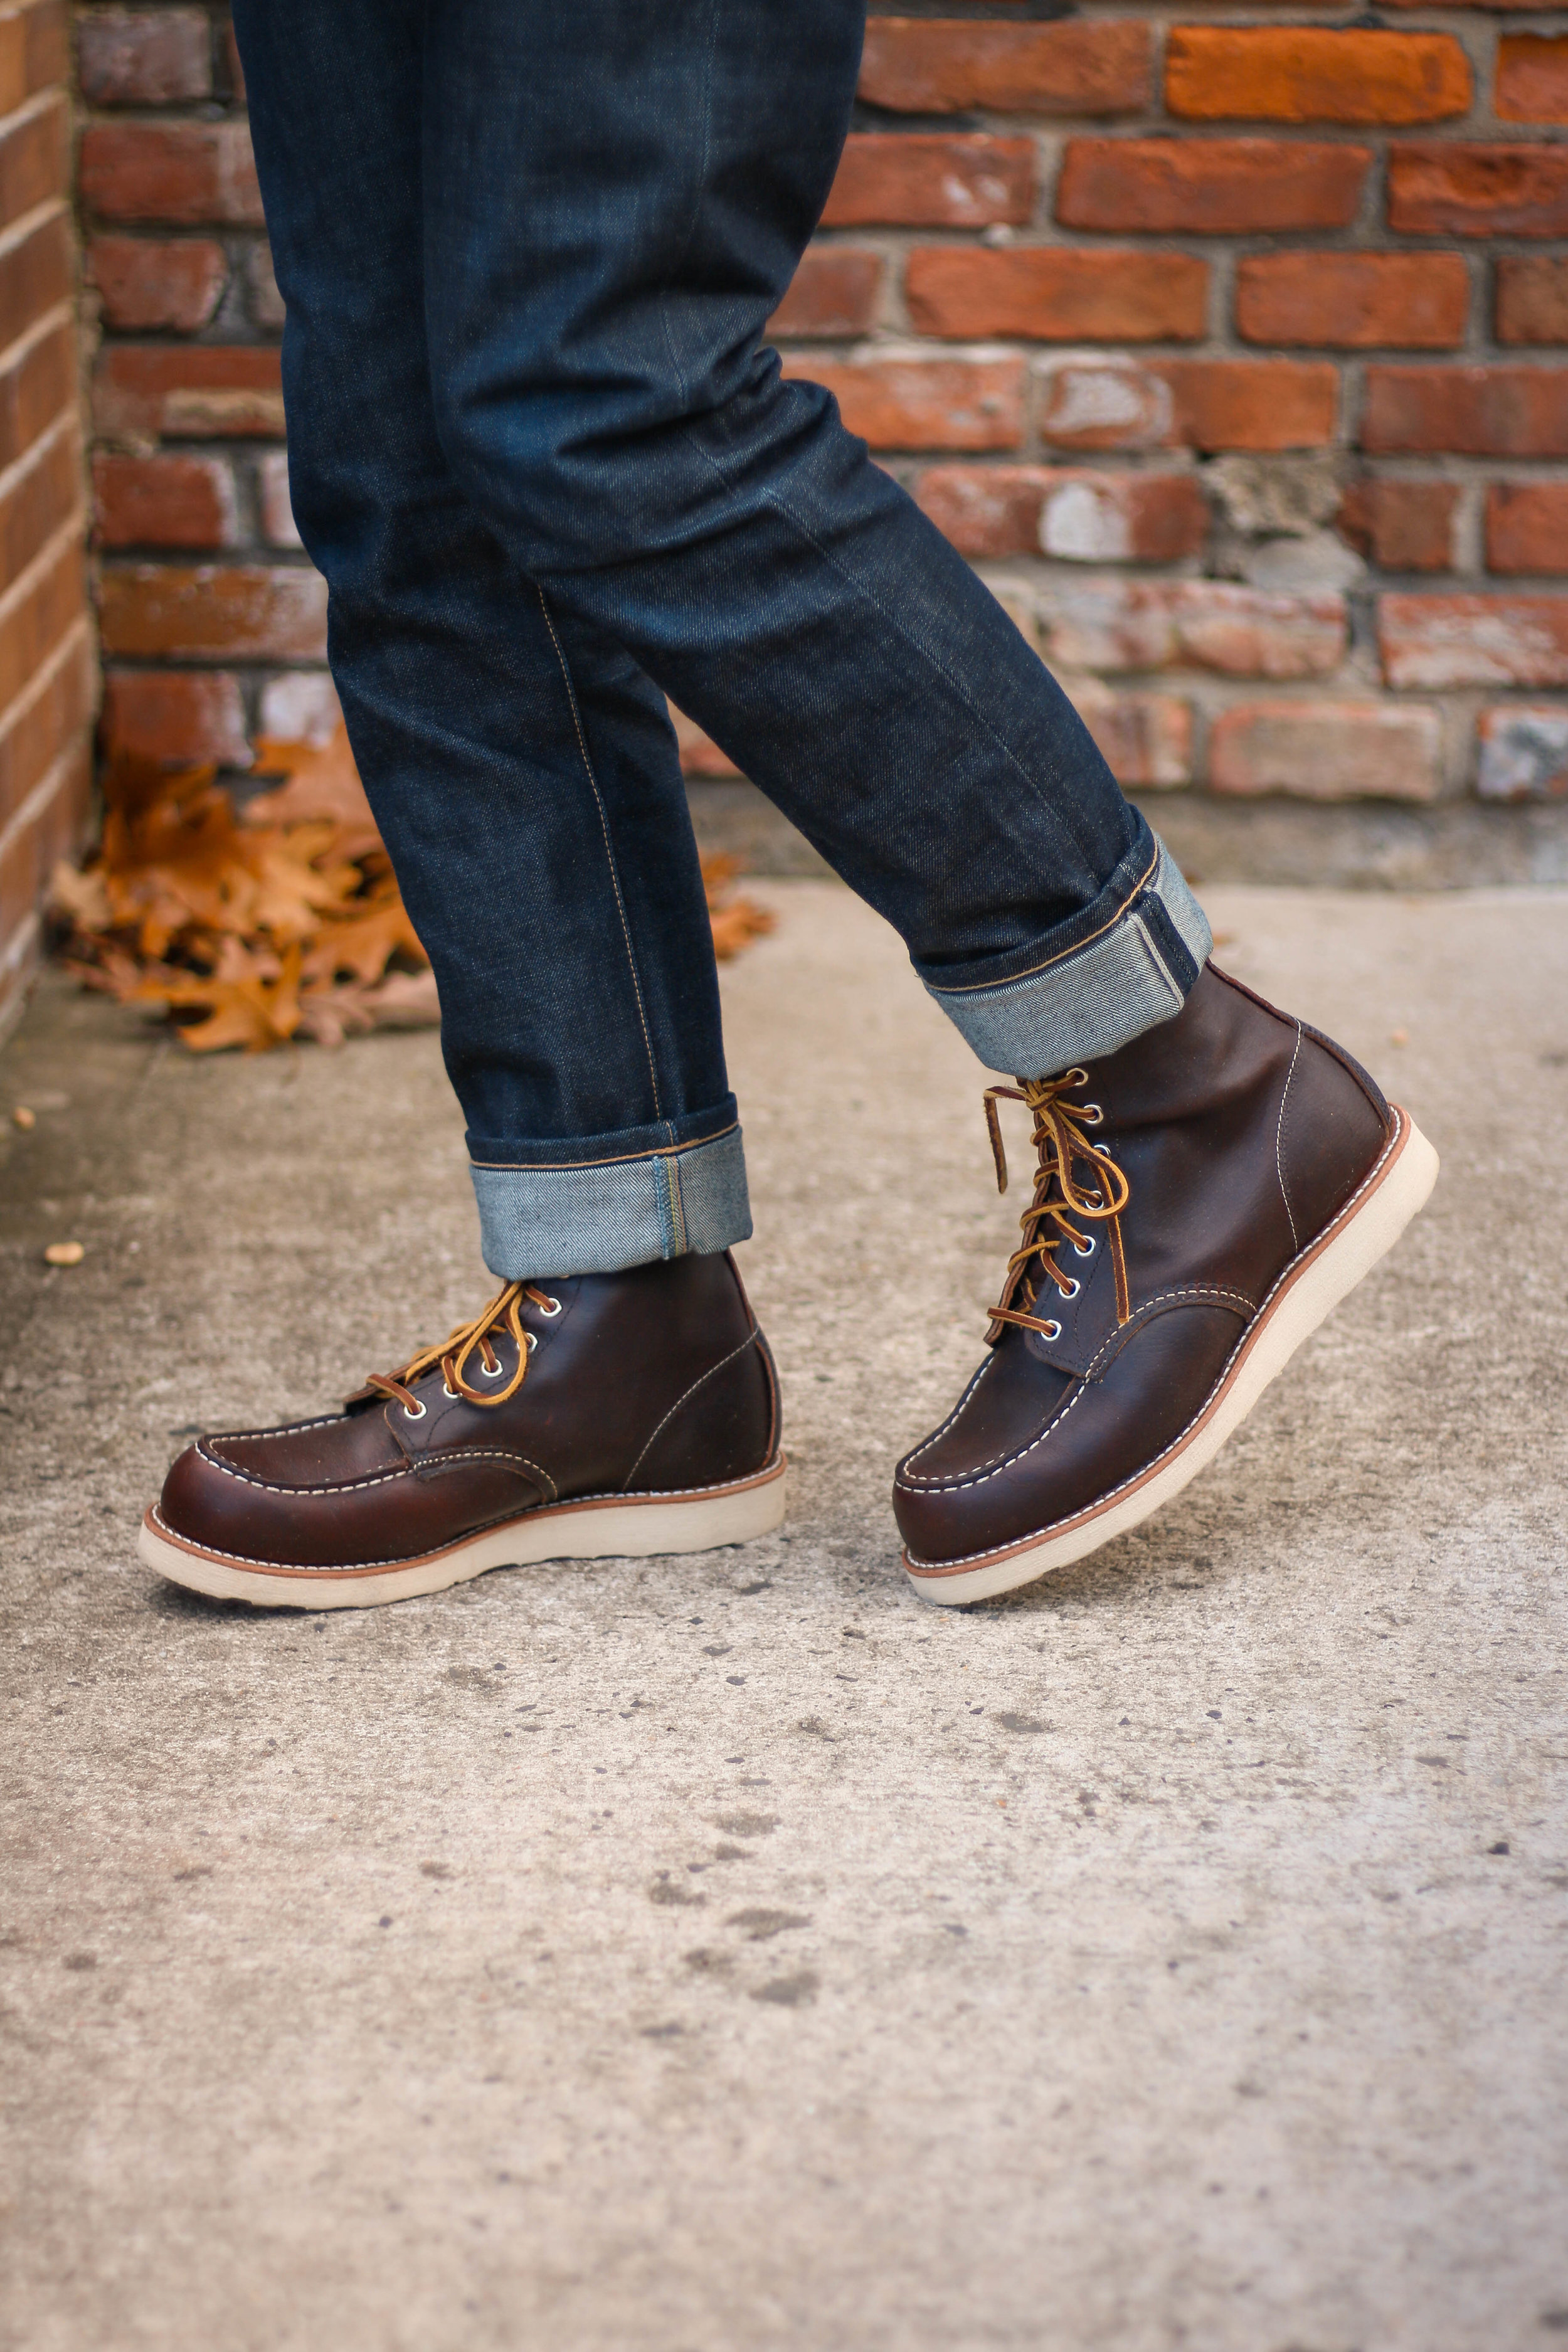 Red Wing Heritage Moc Toe Vs Thorogood, American Heritage Leather Reviews